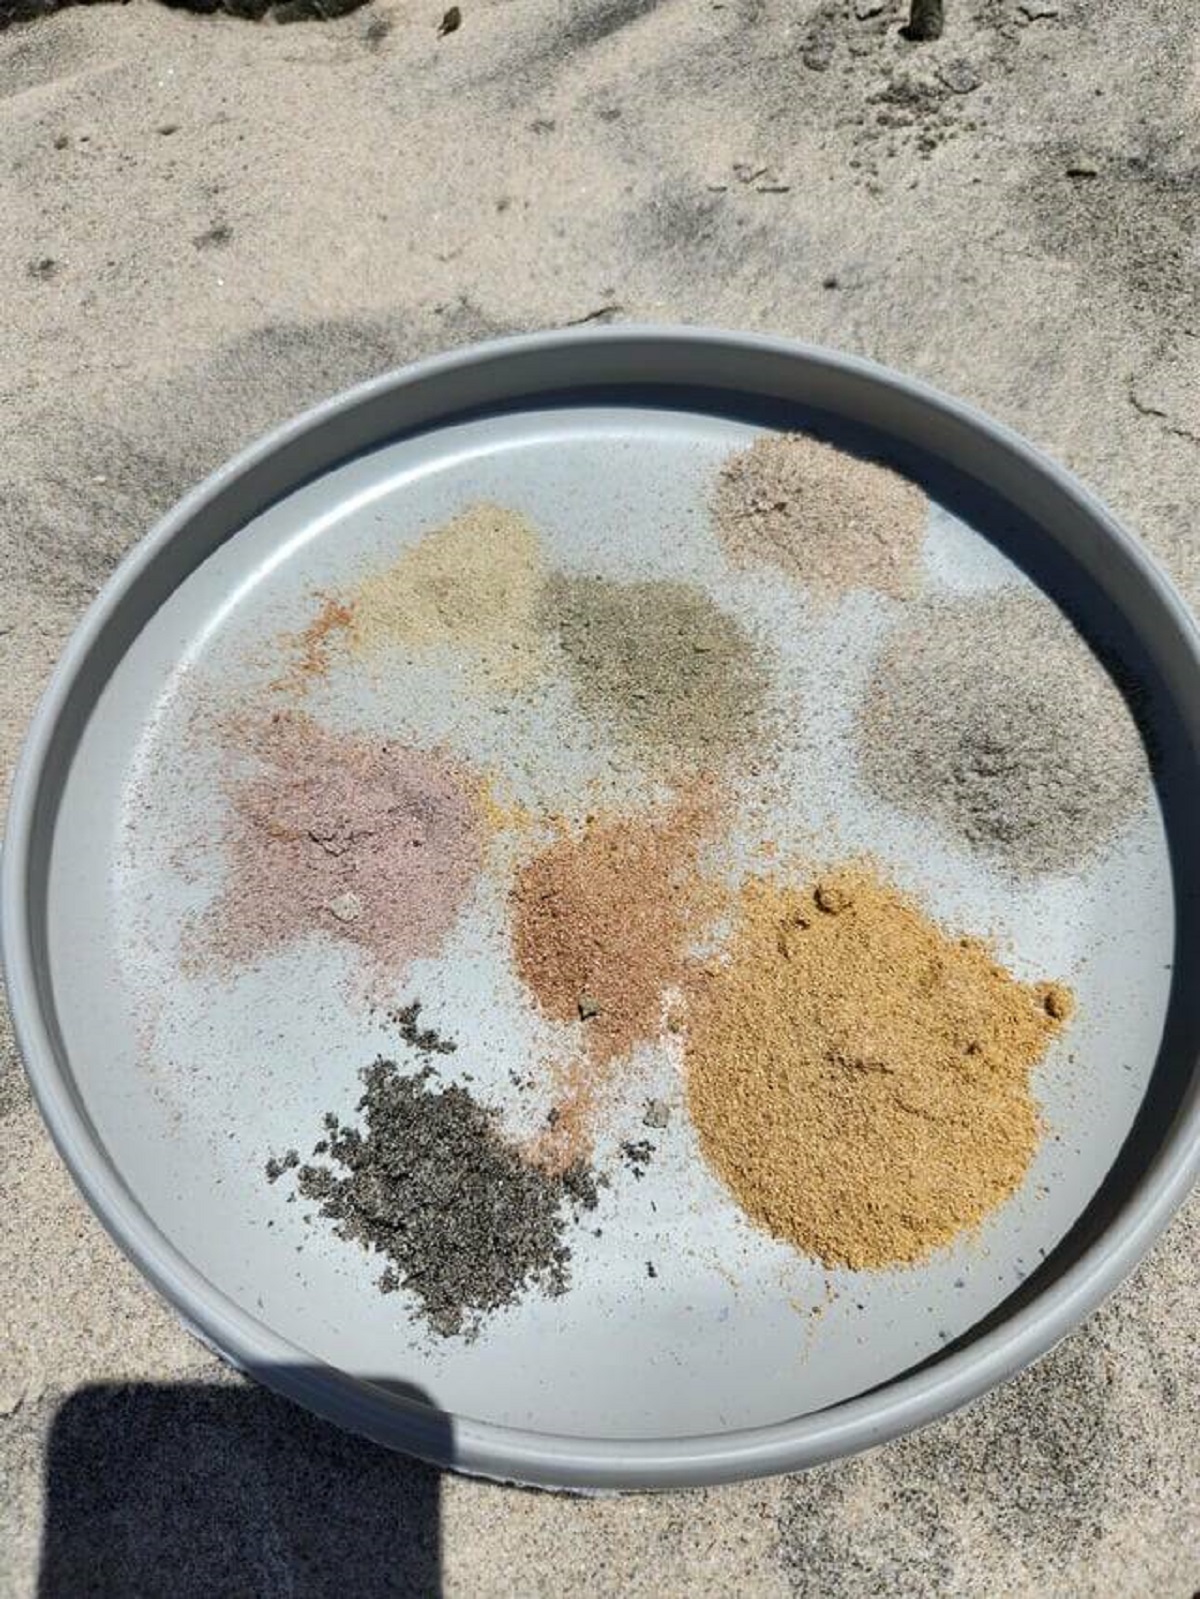 "Found 8 different colors of sand within 10 feet of each other at the beach"